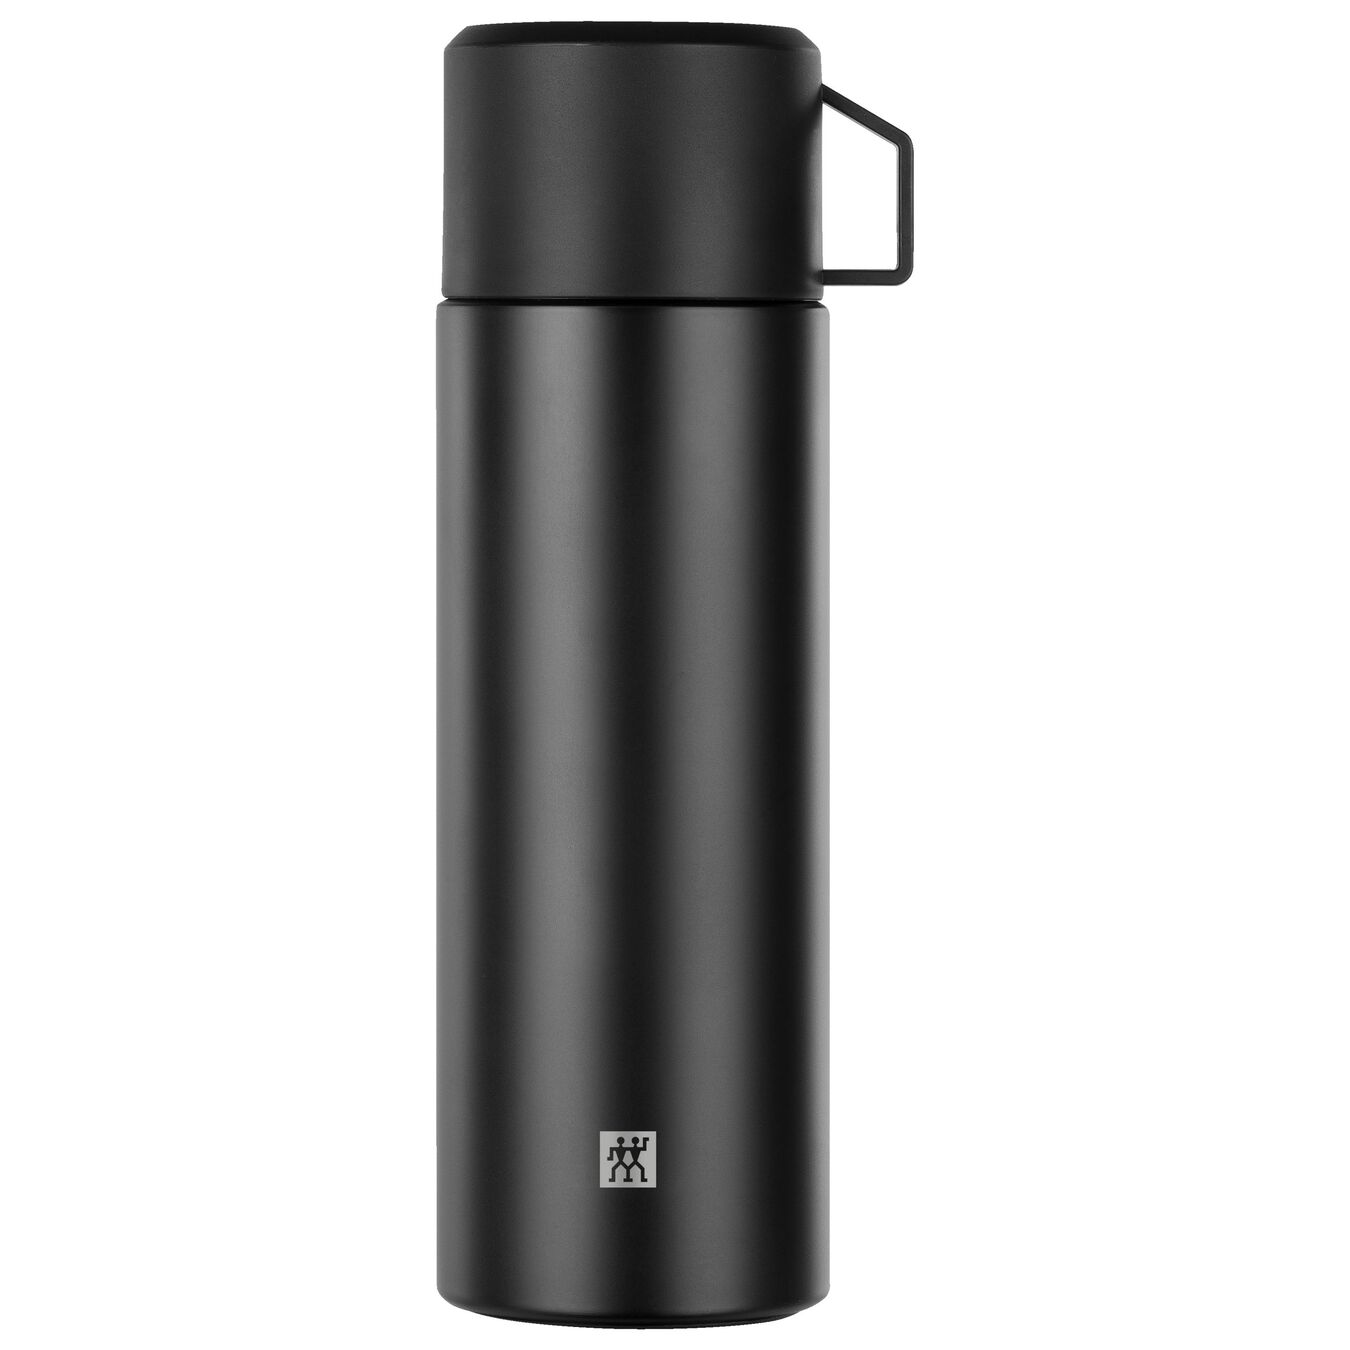 1 l Thermo flask black,,large 1